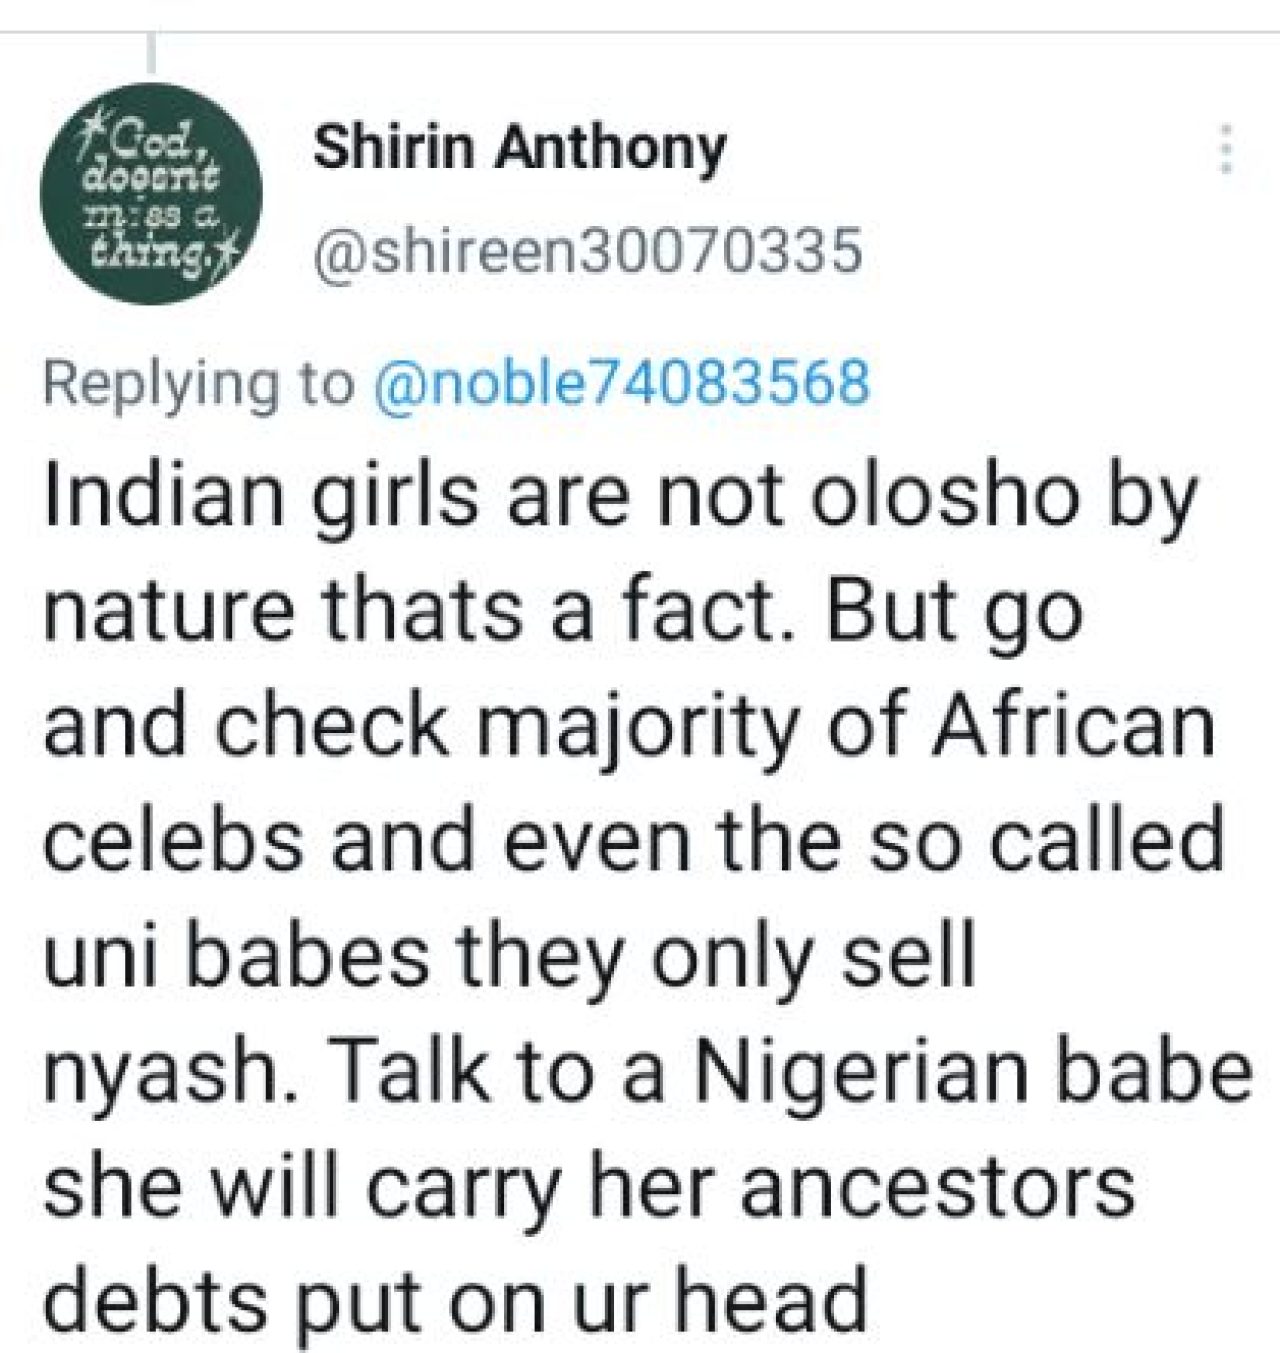 Talk to them and they will carry their ancestors debts on your head - Indian widow of Nigerian man drags Naija women on SM. AdvertAfrica News on afronewswire.com: Amplifying Africa's Voice | afronewswire.com | Breaking News & Stories